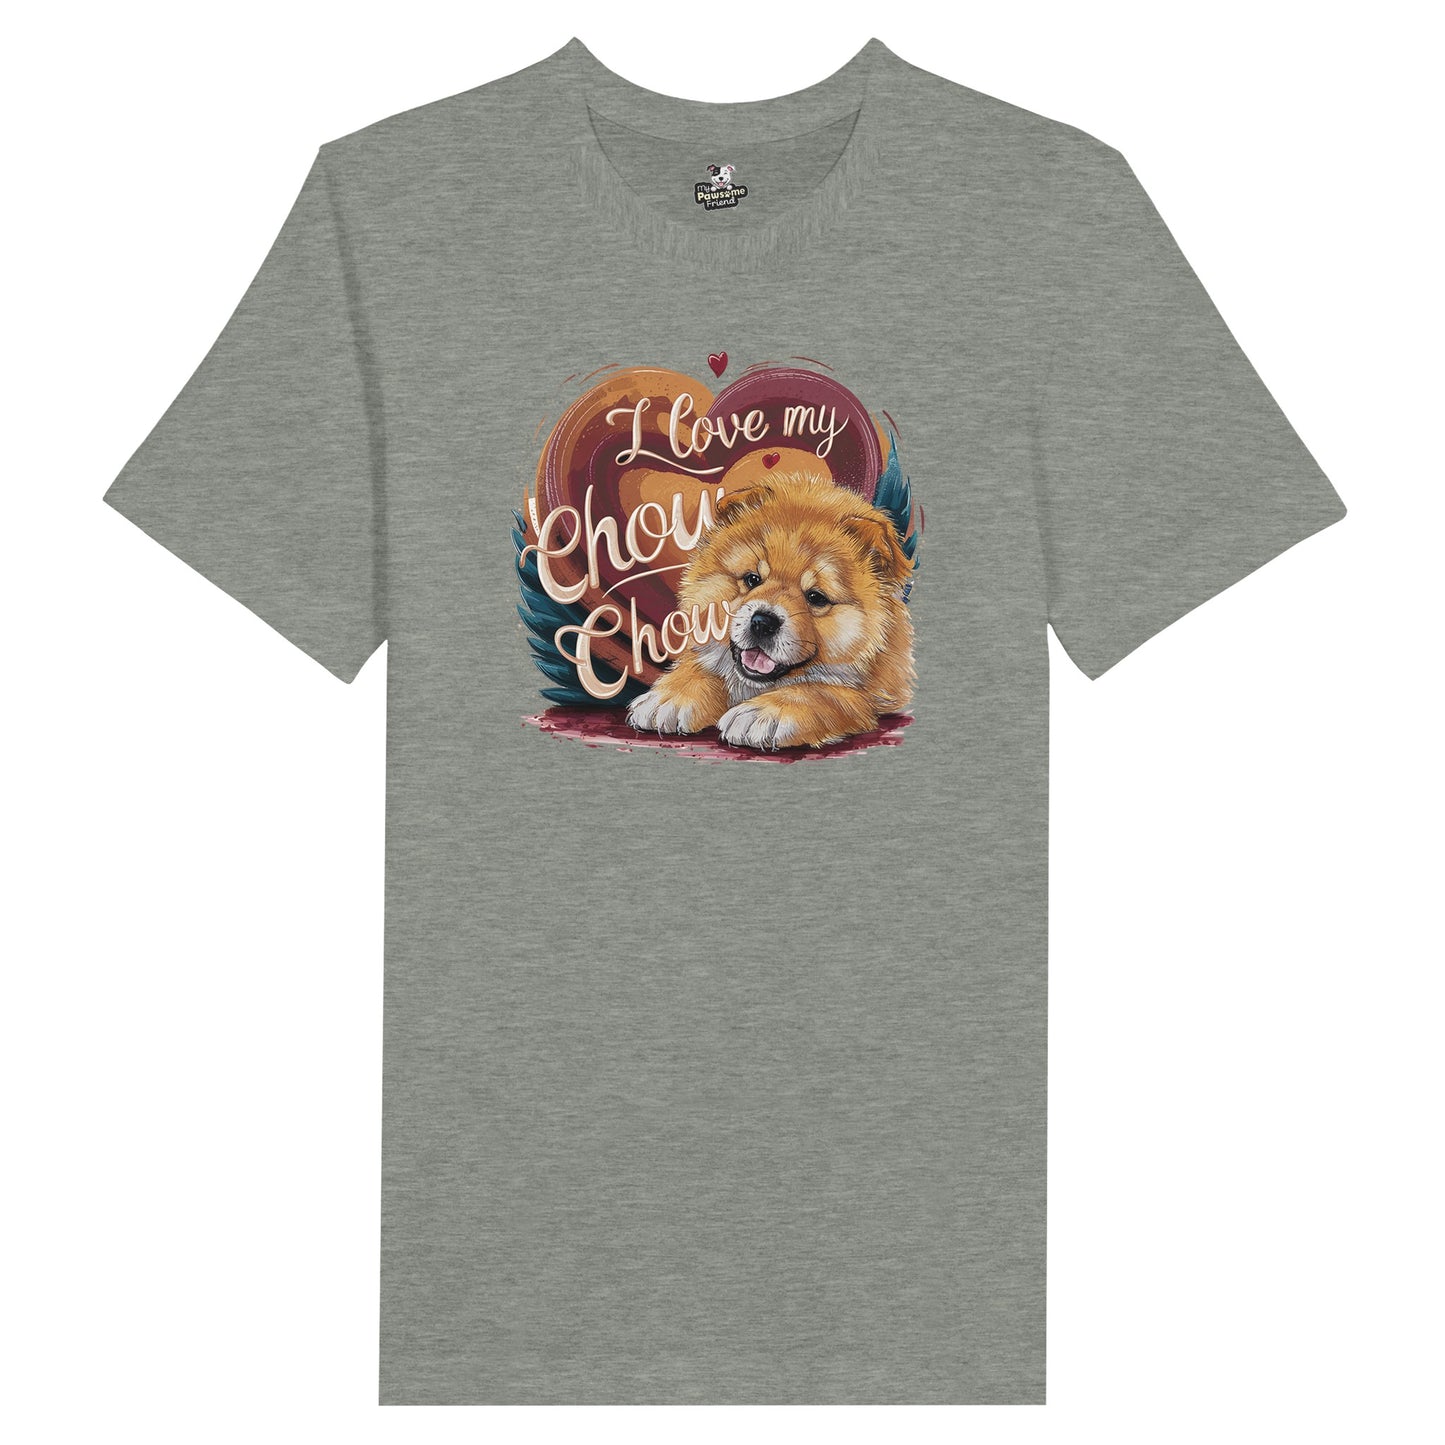 An unisex t shirt with a design with the phrase: "I love my Chow Chow" and a cute chow chow puppy. Shirt color is grey